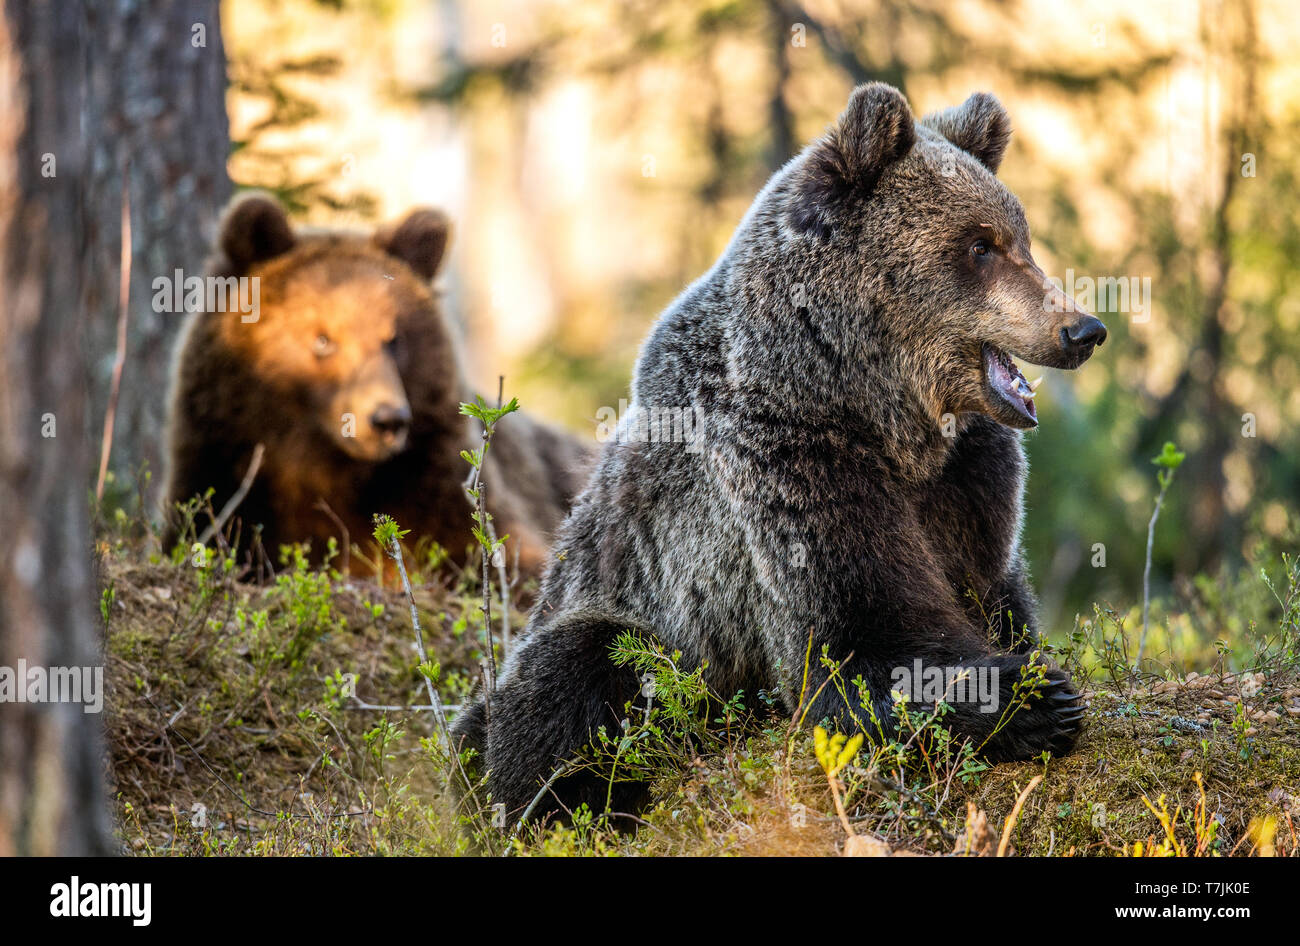 Brown bears in summer forest at sunset light. Scientific name: Ursus Arctos. Stock Photo